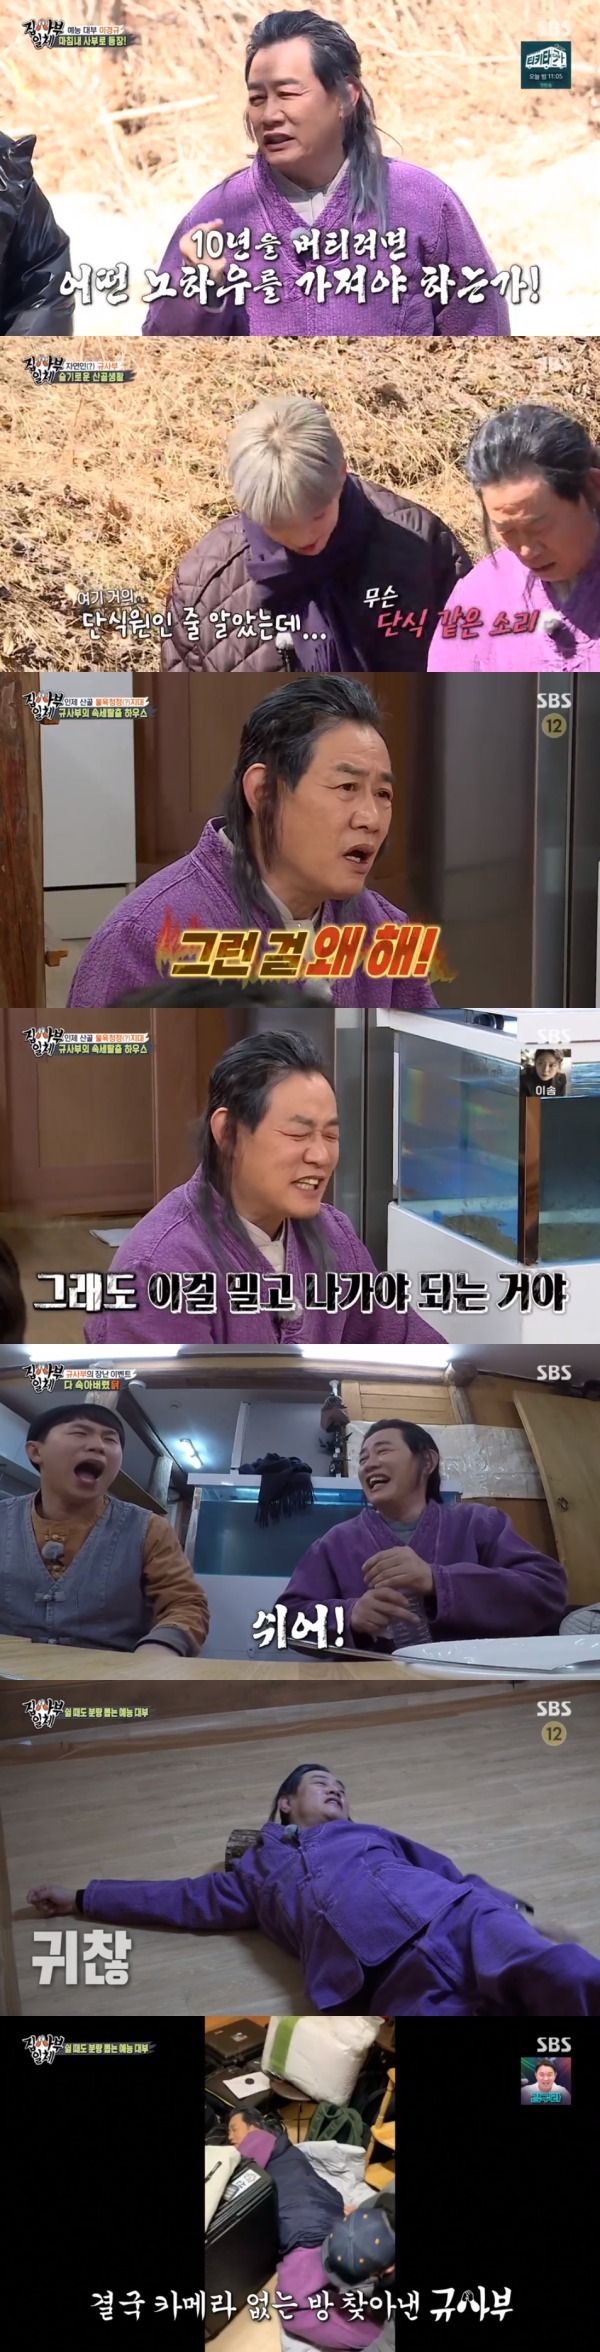 Seoul=) = Lee Kyung-kyu gave a laugh with a consistent character.Comedian Lee Kyung-kyu appeared as a master in SBS All The Butlers broadcast on the last 4 days.Lee Kyung-kyu said, I invited him to this deep mountain to teach him how to live and eat in order to last 10 years of entertainment life.Lee Seung-gi noted that there is a legend that shooting with Lee Kyung-kyu creates the quantity in the shortest time.Lee Kyung-kyu expressed confidence that the filming will only take about three hours today - the rest is free time.Members cheered Lee Kyung-kyus words, who were convinced of the short shooting time.Nature Lee Kyung-kyu introduced the house to members, who, as if sincerely saying they would finish filming in three hours, introduced the house at a rapid pace.Lee Kyung-kyu said he was raising pineapple in his garden, leaving members baffled.When I dug the ground, I found a box of markets and a box of ramen, canned and instant coffee in the Jangdokdae, and a rant burst into Lee Kyung-kyus garden that destroyed common sense.All members were worried about the amount of Lee Kyung-kyu at the speed of electrolithography.Lee Seung-gi has told of the troubles that arise when he is doing a longevity program, with Lee Kyung-kyu advising, Dont try to win, saying, Its not funny, itll end someday.If youre having fun, do it again. Im five now, but dont think youre going to go to five forever. Two will fly. Dont give me your heart.He also advised on Character: This will make the image worse, but its pushing to the end.Then its about being a character, he said.When asked what he was doing now after lunch, Lee Kyung-kyu said rest briefly and simply:Lee Kyung-kyu went into the room and started resting after slatting, and the members were troubled by the masters words to plan the next corner they wanted to do.Lee Seung-gi said he wanted to play games or get them and worried that Lee Kyung-kyu would be OK.Yang Se-hyeong asked Lee Kyung-kyu and Lee Kyung-kyu told him to do whatever he wanted.Members kept waking up to sleep Lee Kyung-kyu and making him annoyed and laughed; Lee Kyung-kyu enjoyed a nap in search of a cameraless room.